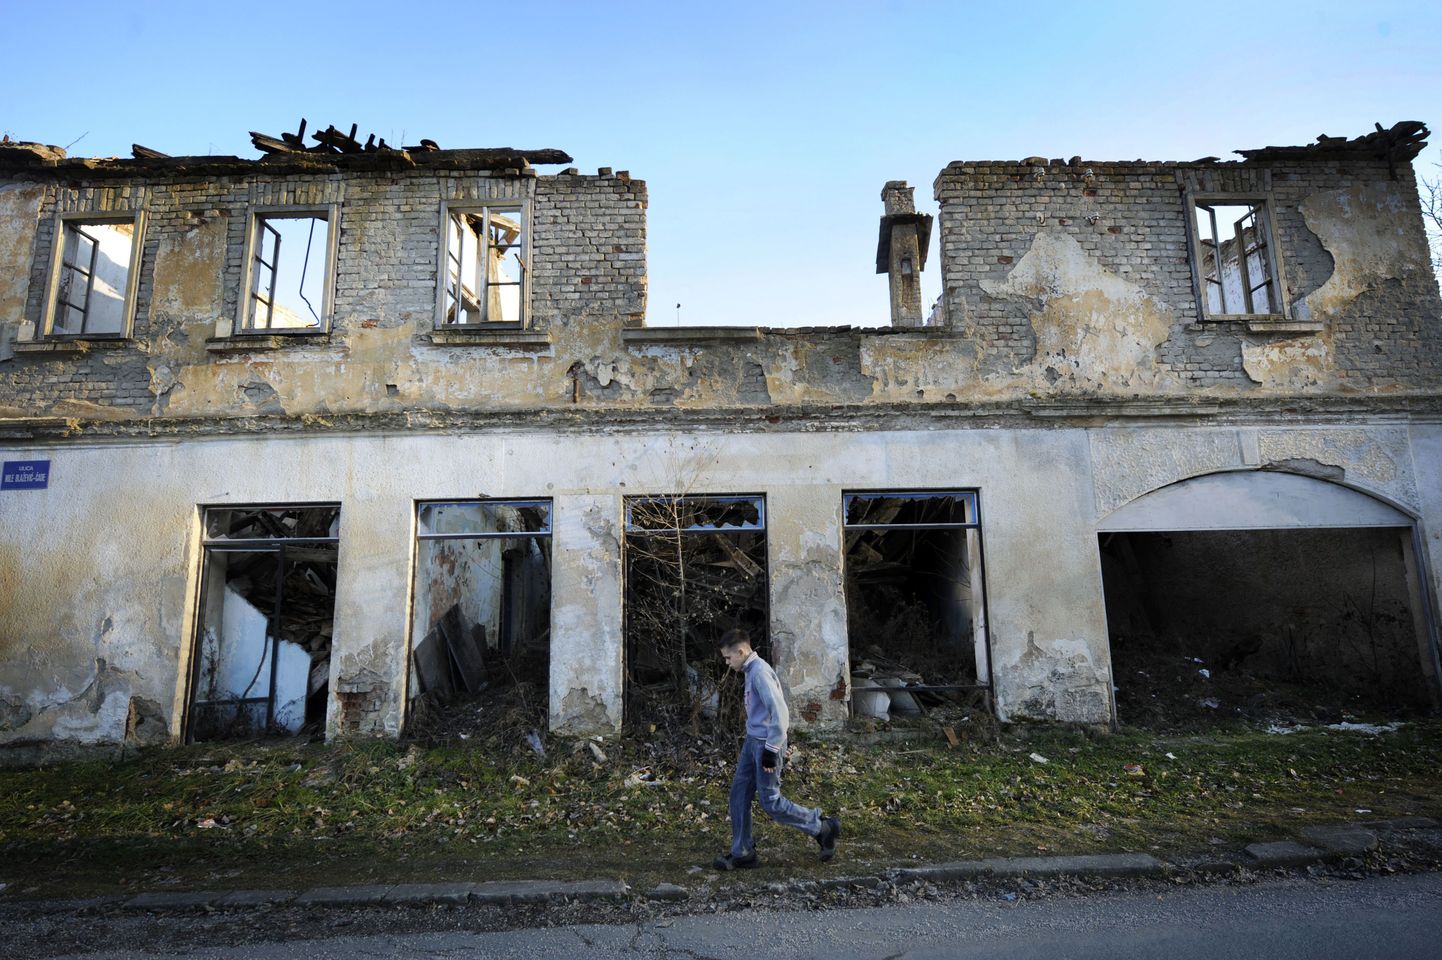 A boy walks past a building destroyed in the 1991-1995 Serbo-Croatian war, on January 18, 2011 in the central Croatian town of Dvor.